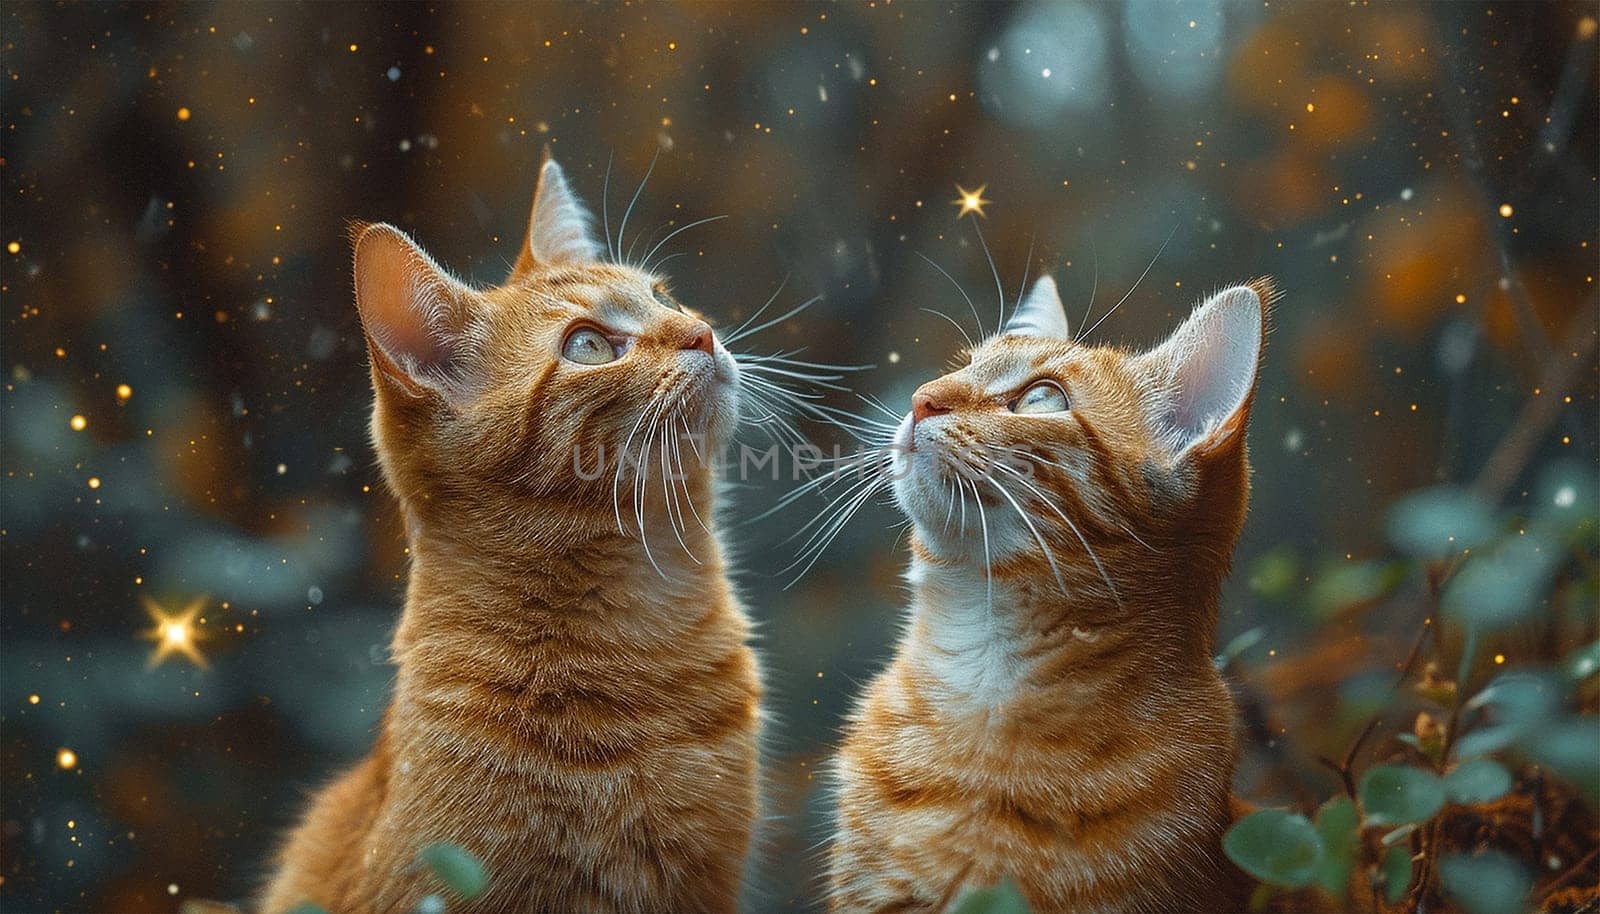 A cute cat looking outside at the starry colorful sky. Cute kitten magical sparkles. Starry glow lights in nature Magical landscape fairytale beauty Copy space